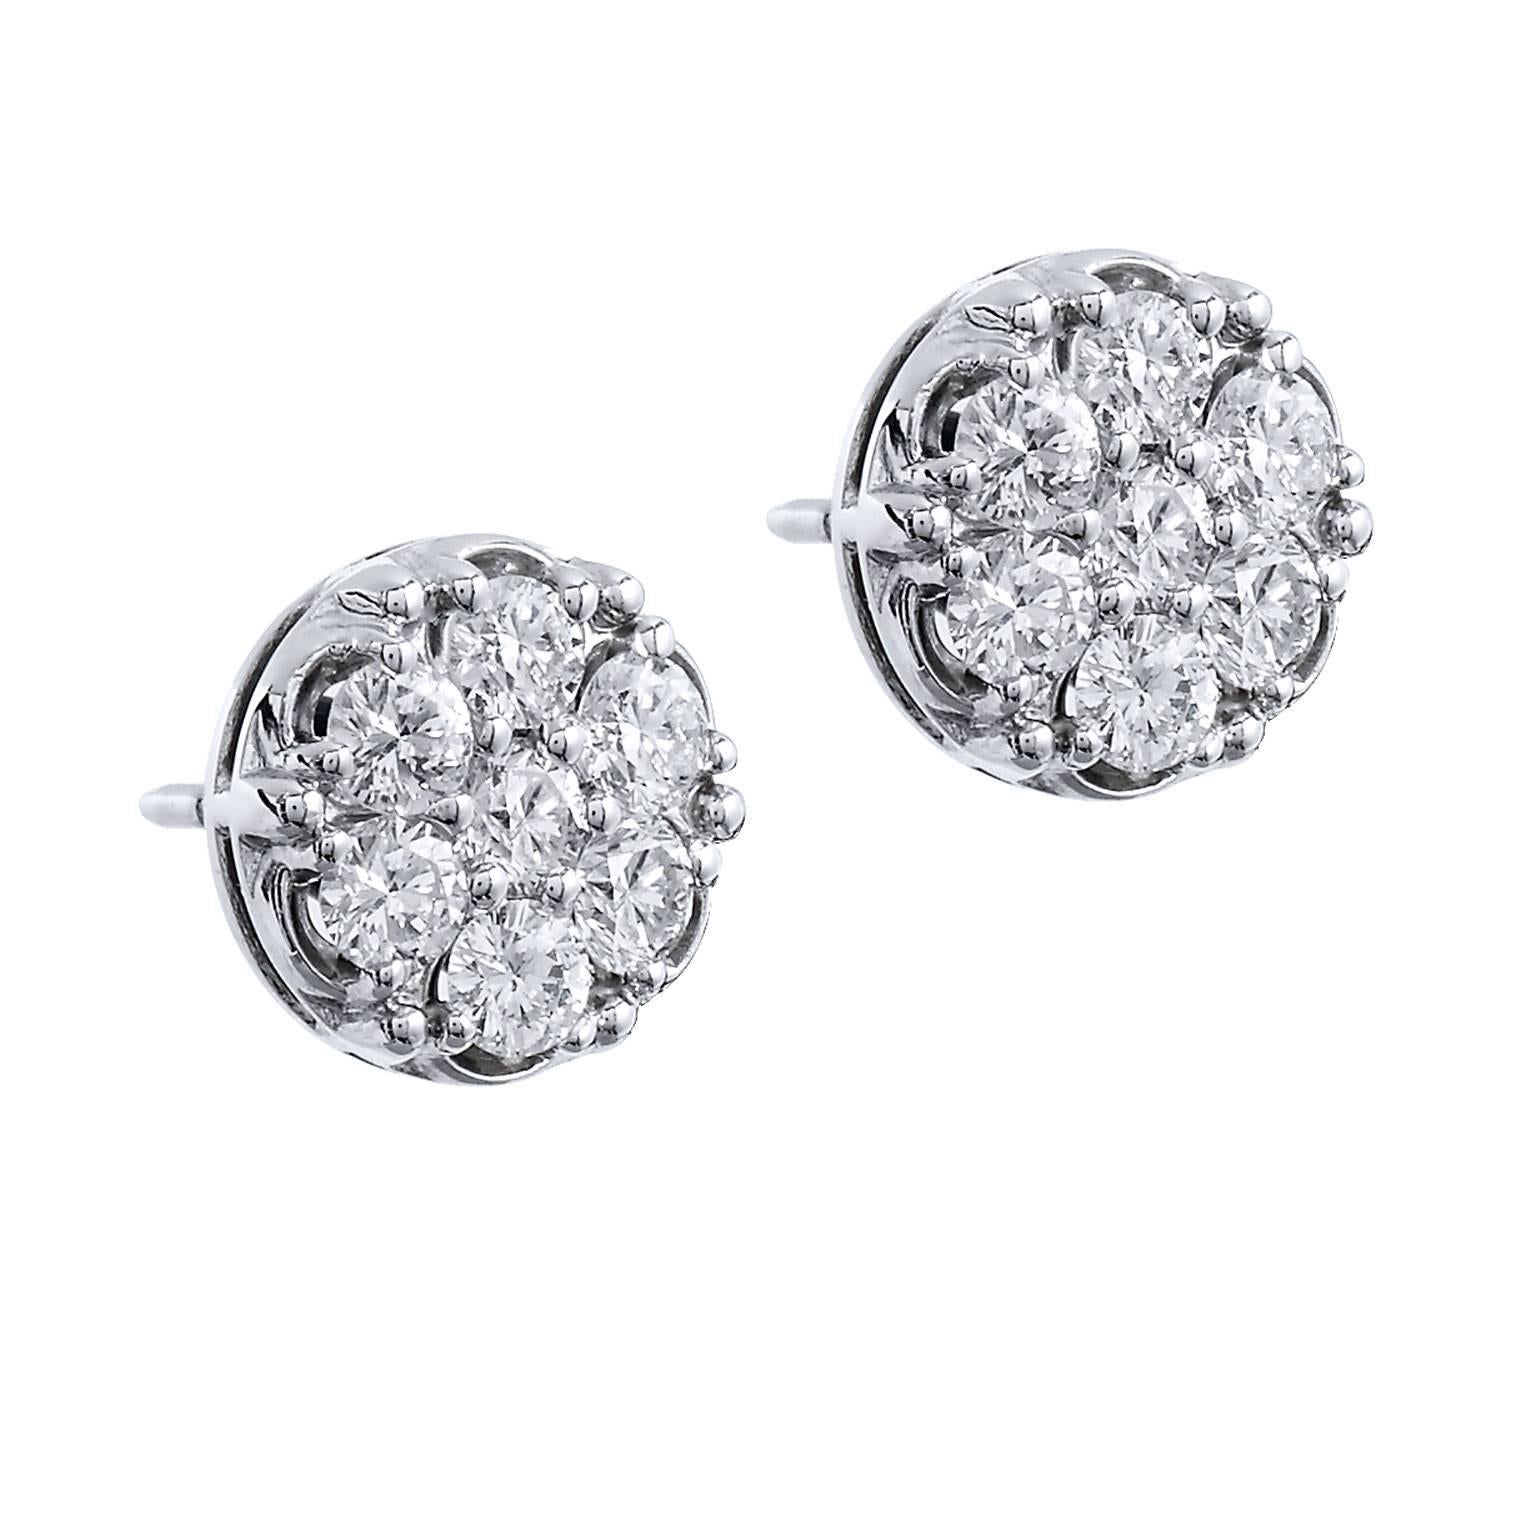 Enjoy these previously loved 14 karat white gold stud earrings featuring 1.65 carat of pave set diamond in circular orientation (F/G/SI1).